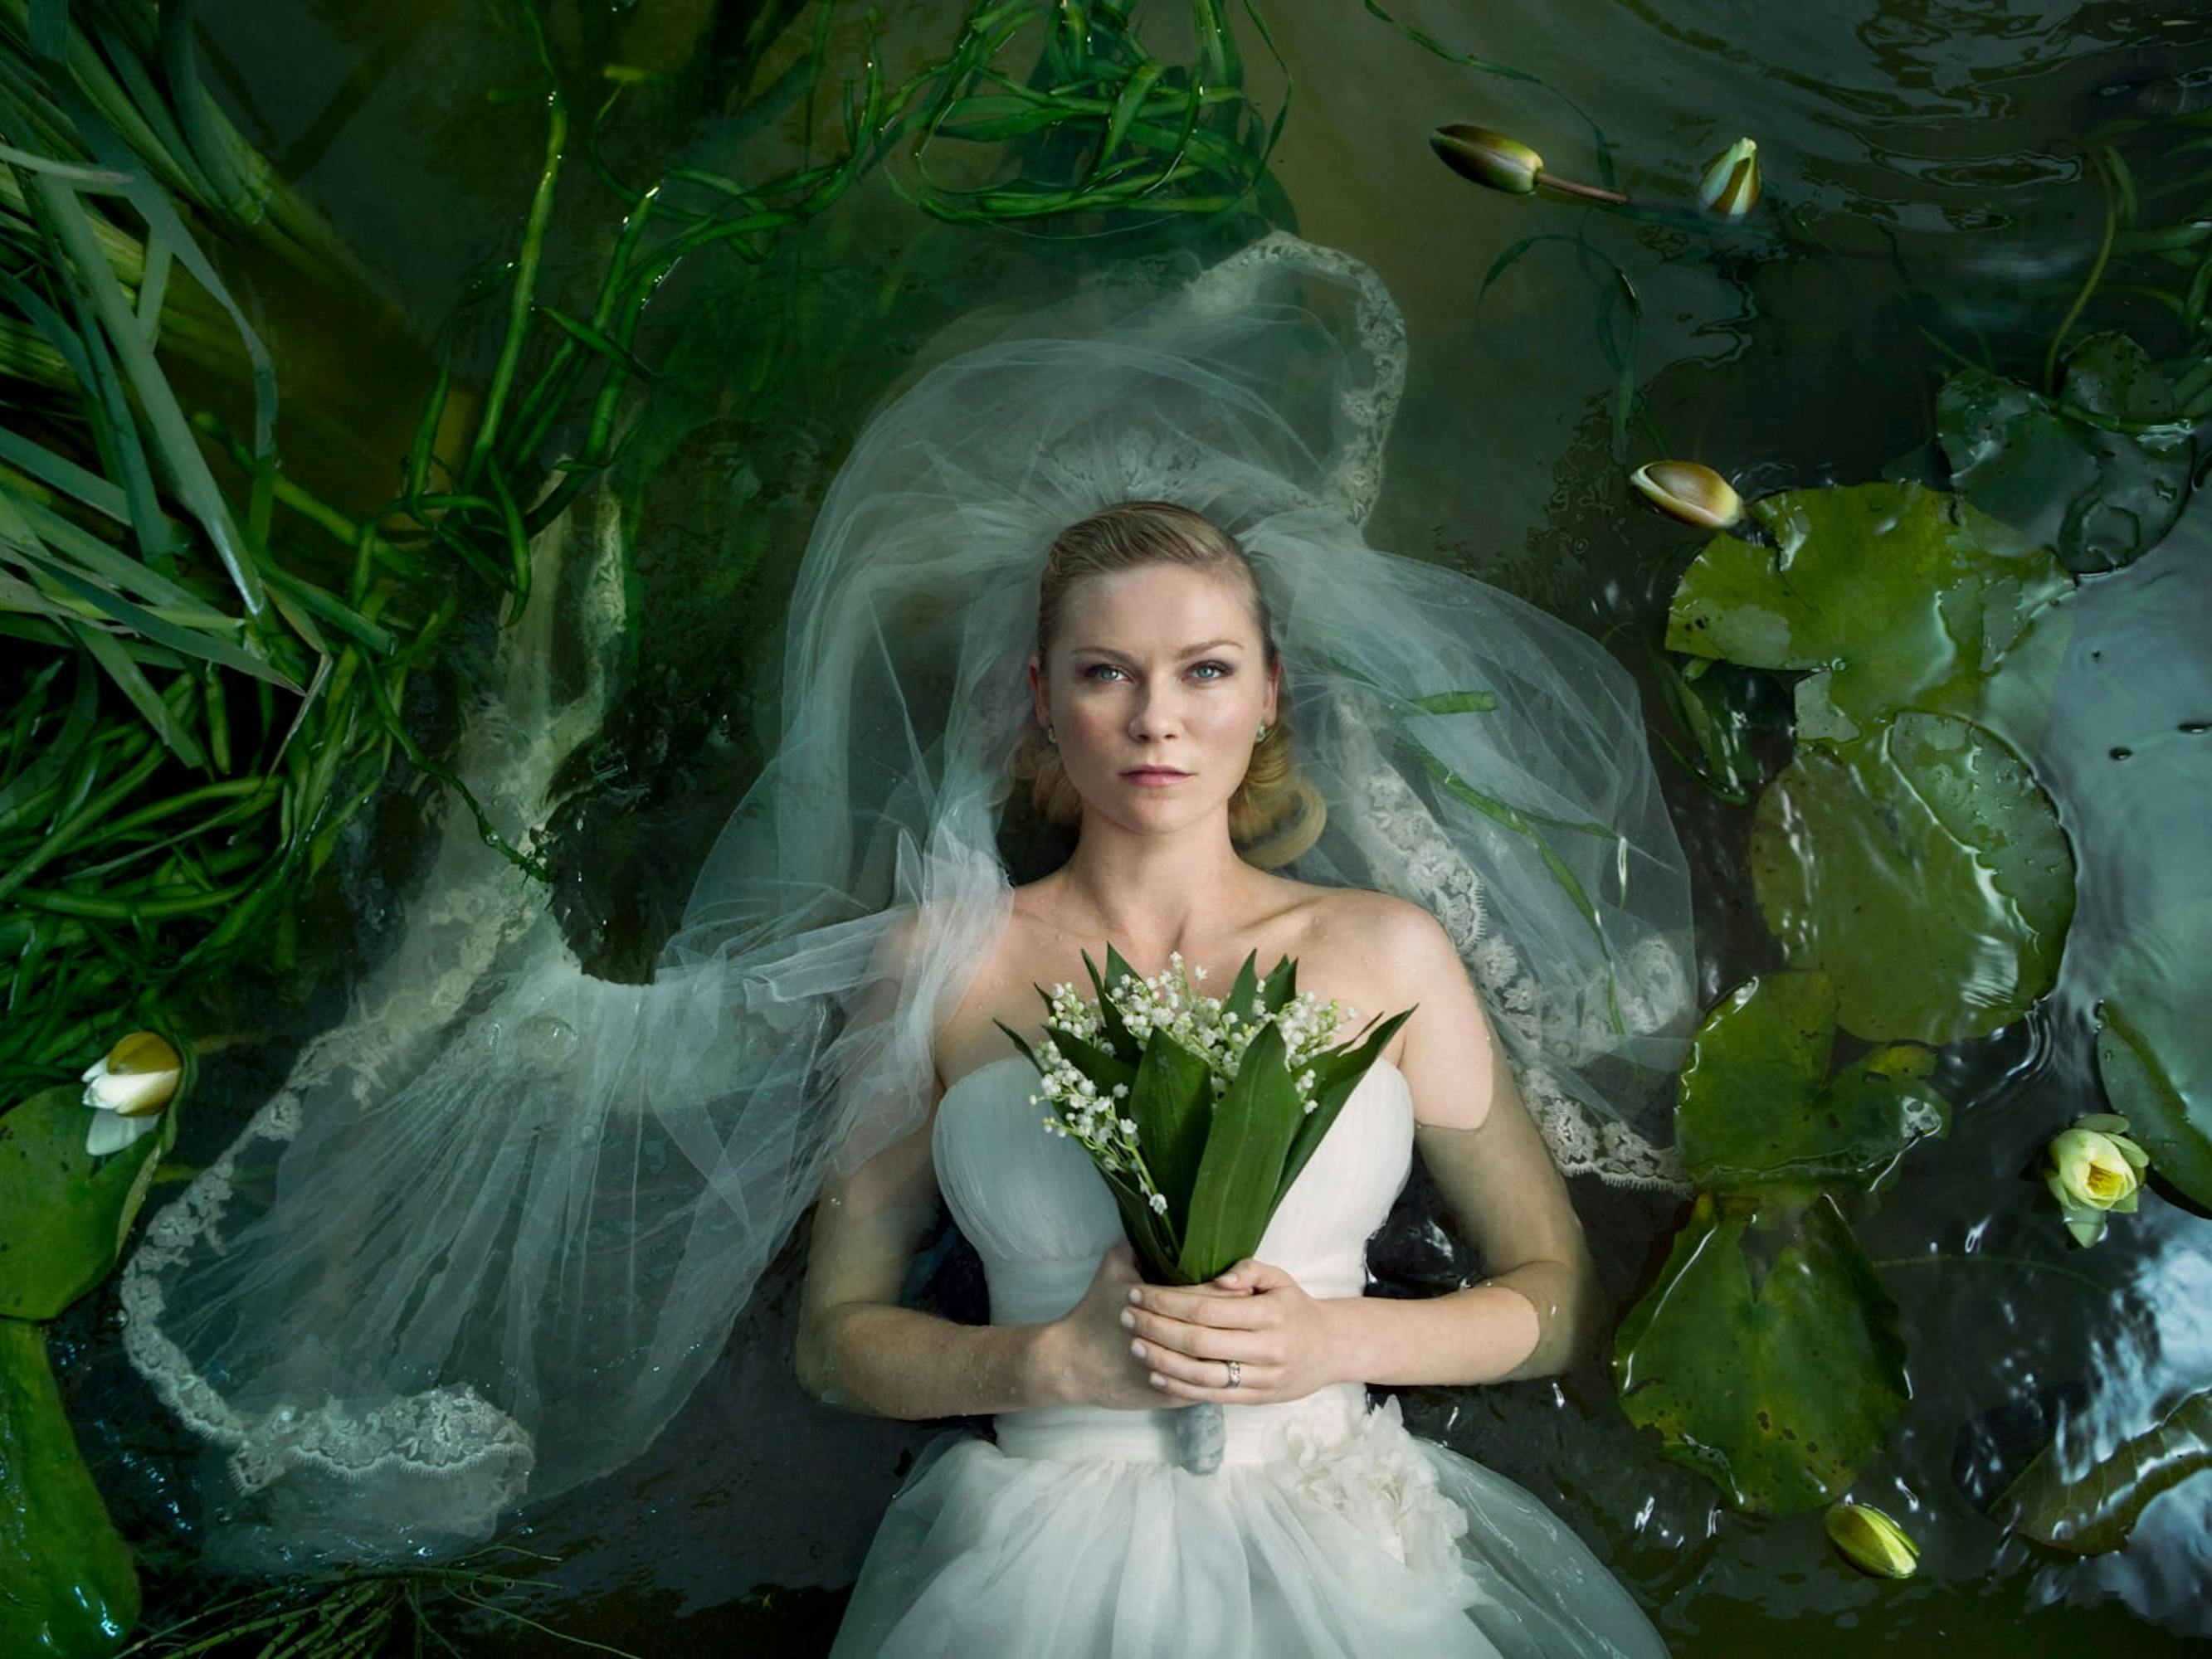 Justine (Kirsten Dunst) wears a wedding dress and holds a bouquet to her chest. She’s surrounded by lilypads and other greenery in a murky pond.